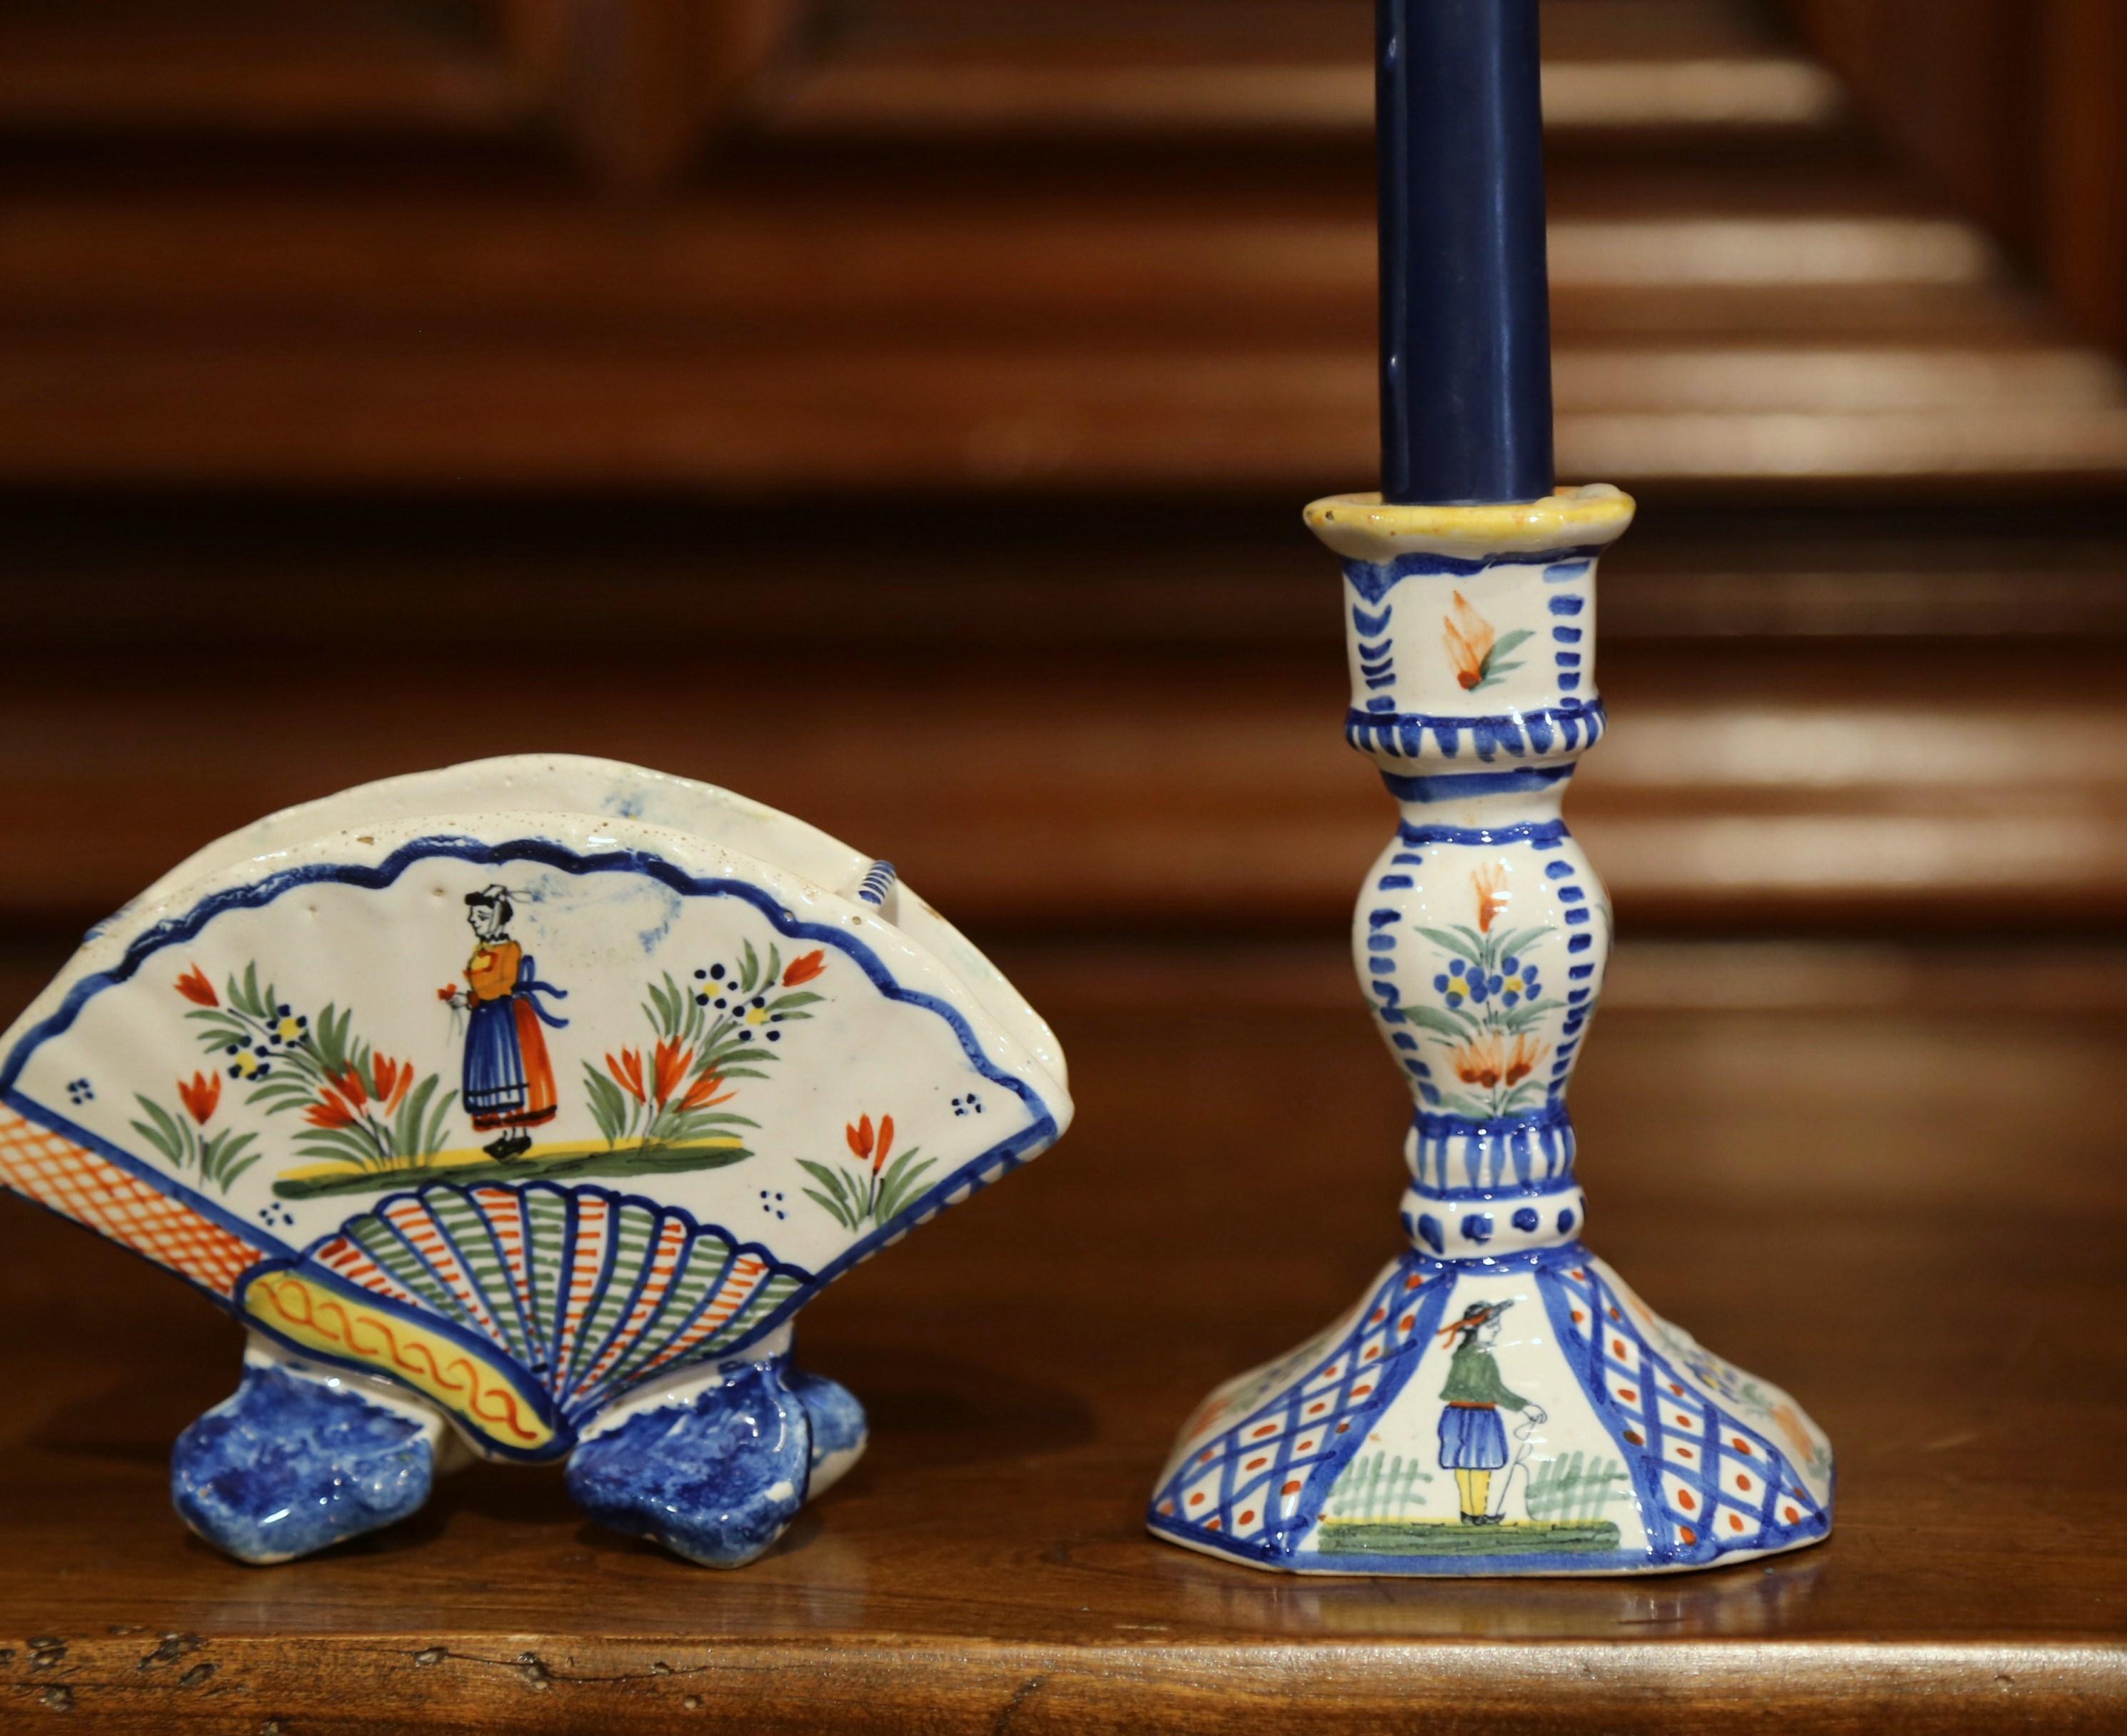 20th Century French Faience Pair of Candlesticks with Vase from Henriot Quimper In Excellent Condition For Sale In Dallas, TX